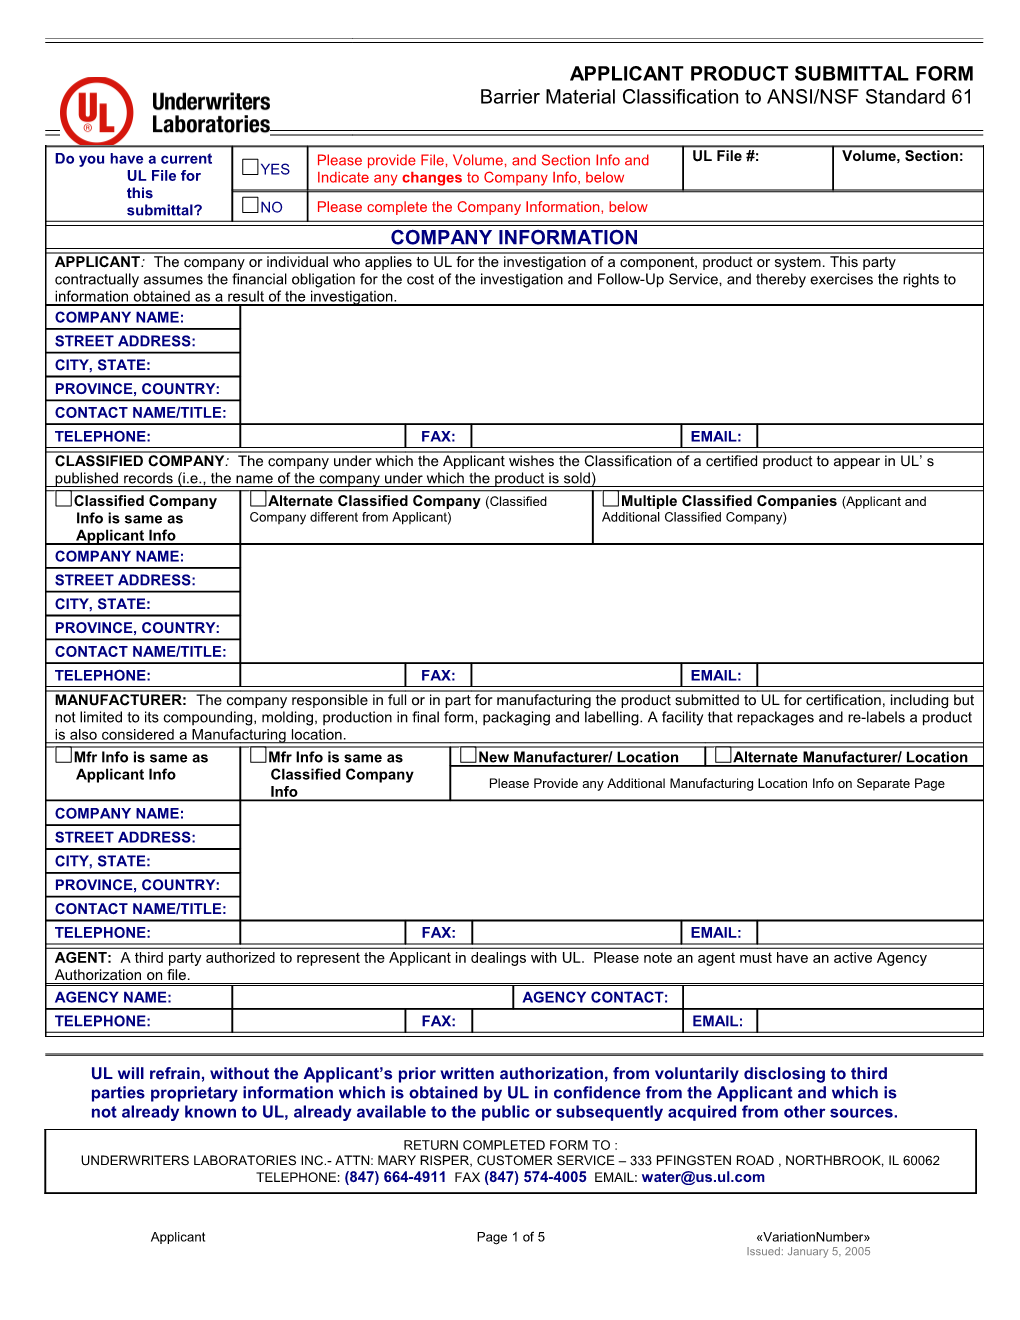 Applicant Product Submittal Form